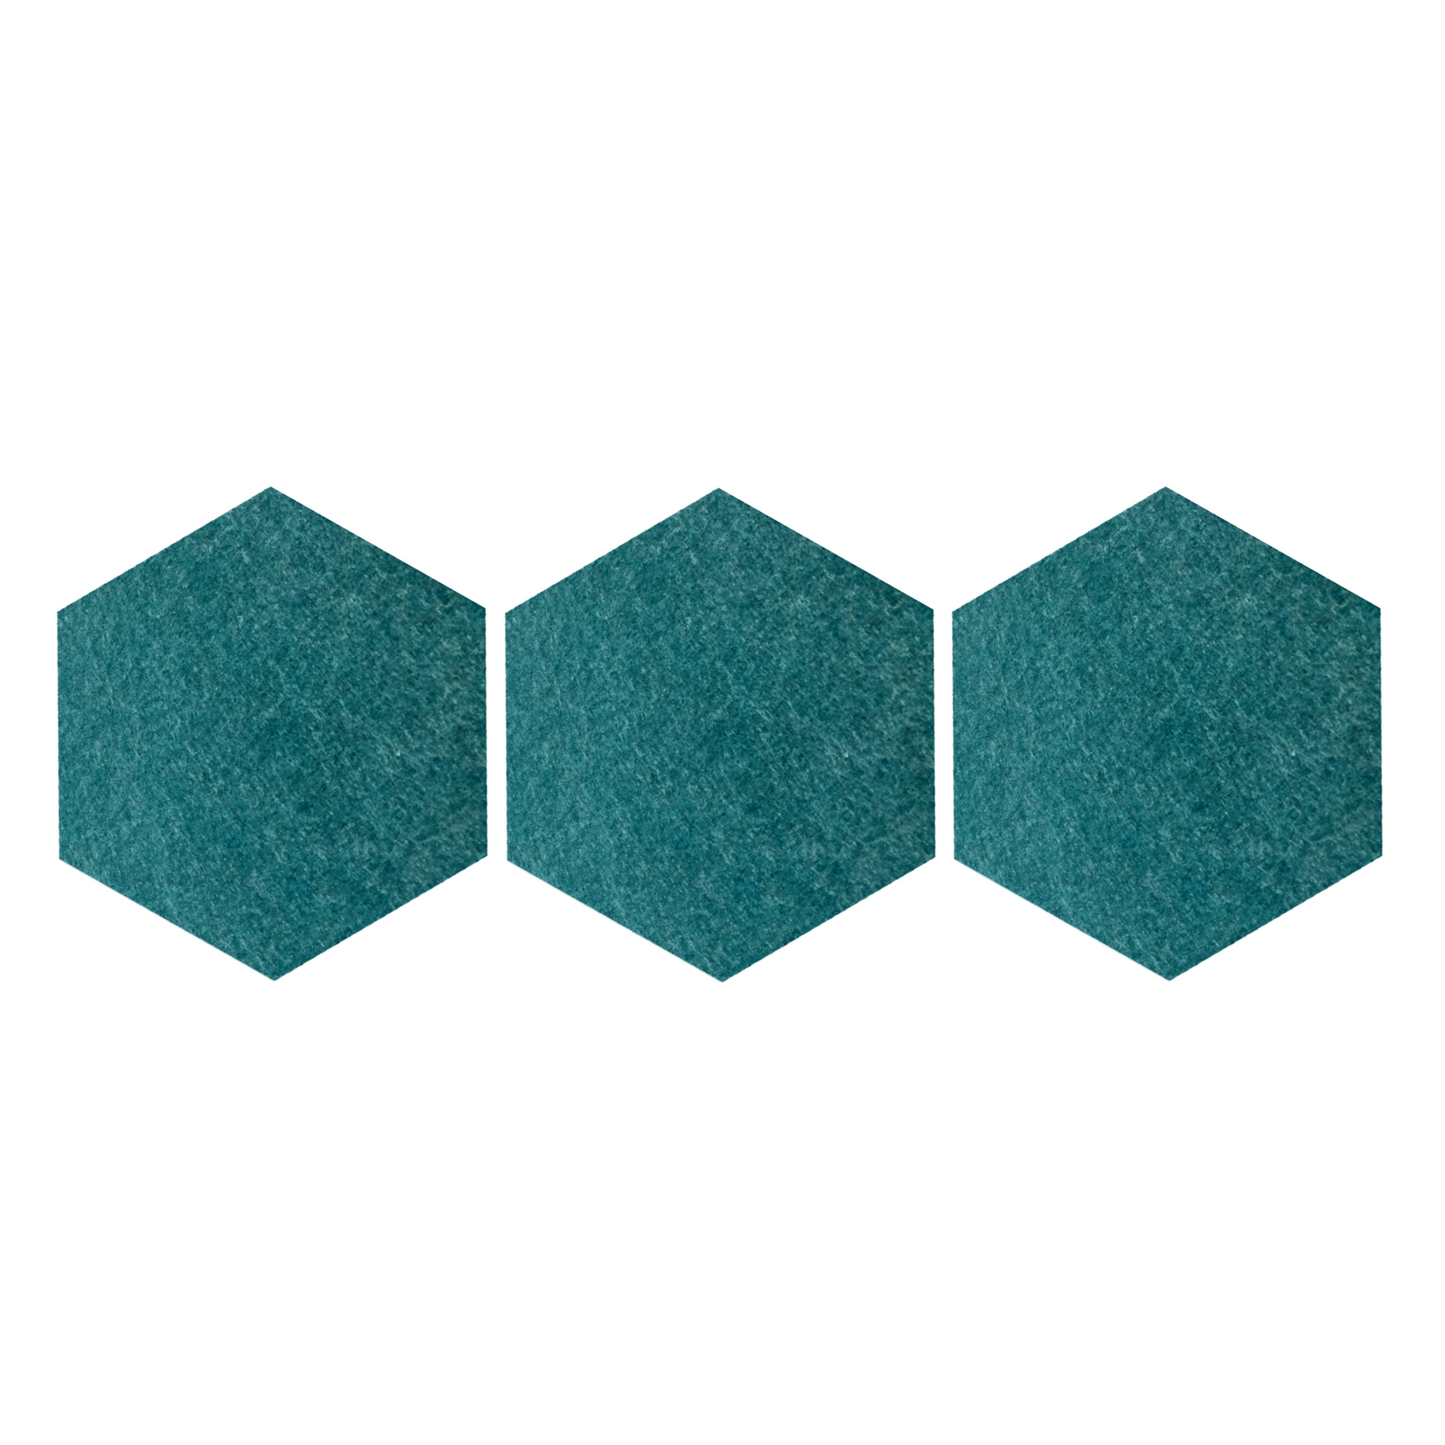 Hexagon Acoustic Wall Panel, 12"x10"x9mm | Acoustic Panel for soundproofing